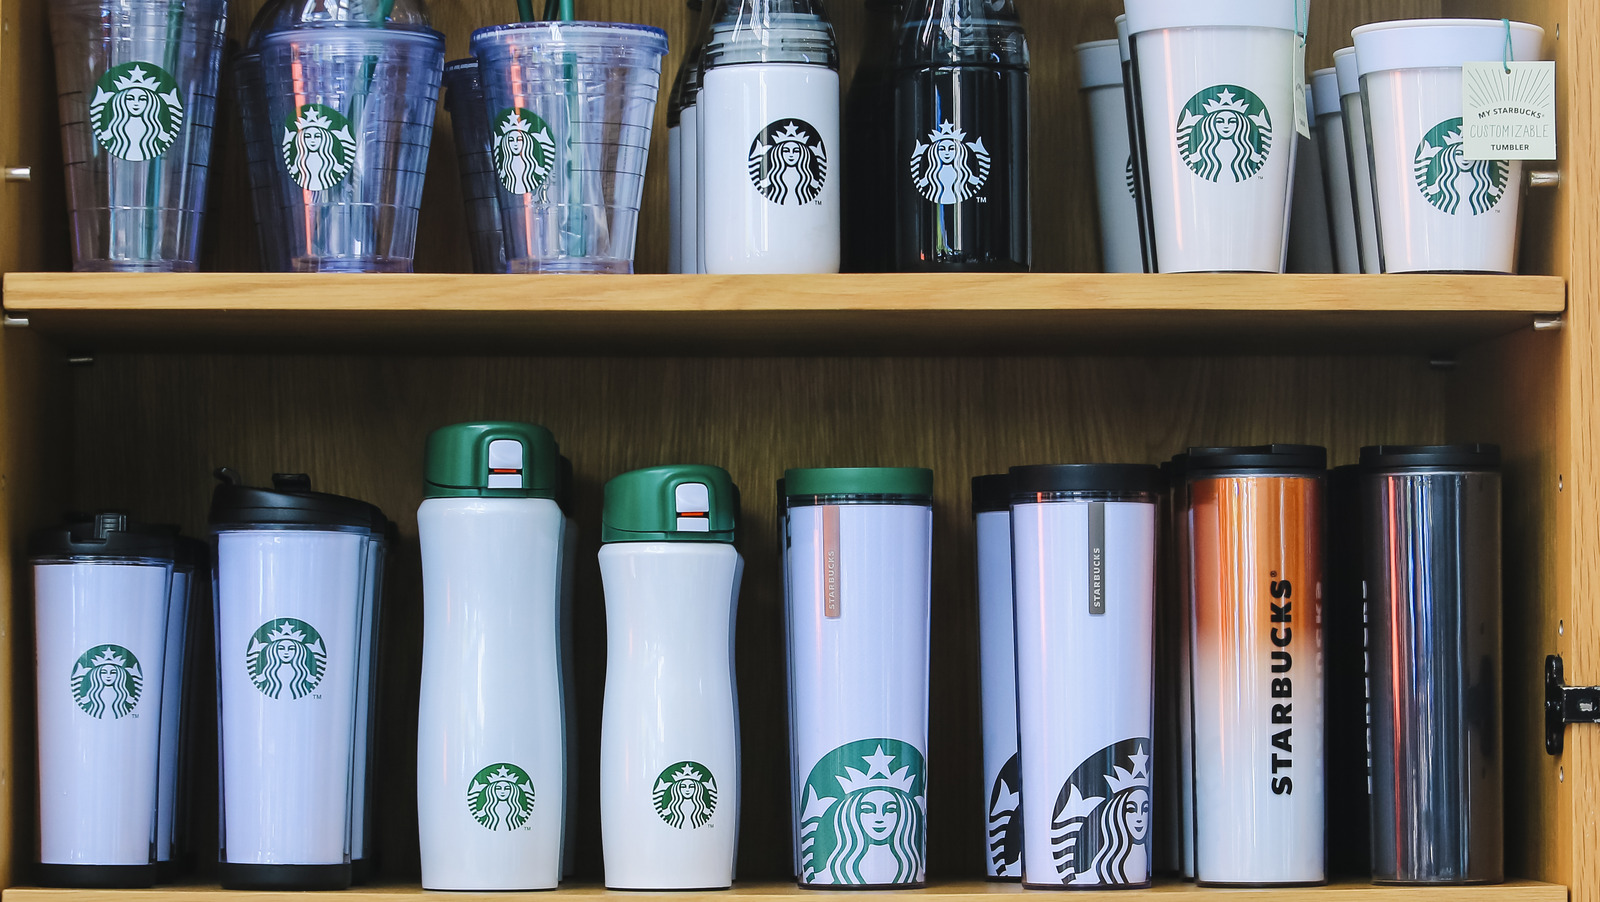 https://www.mashed.com/img/gallery/starbucks-fans-cant-wait-to-get-their-hands-on-this-glass-tumbler/l-intro-1646240785.jpg